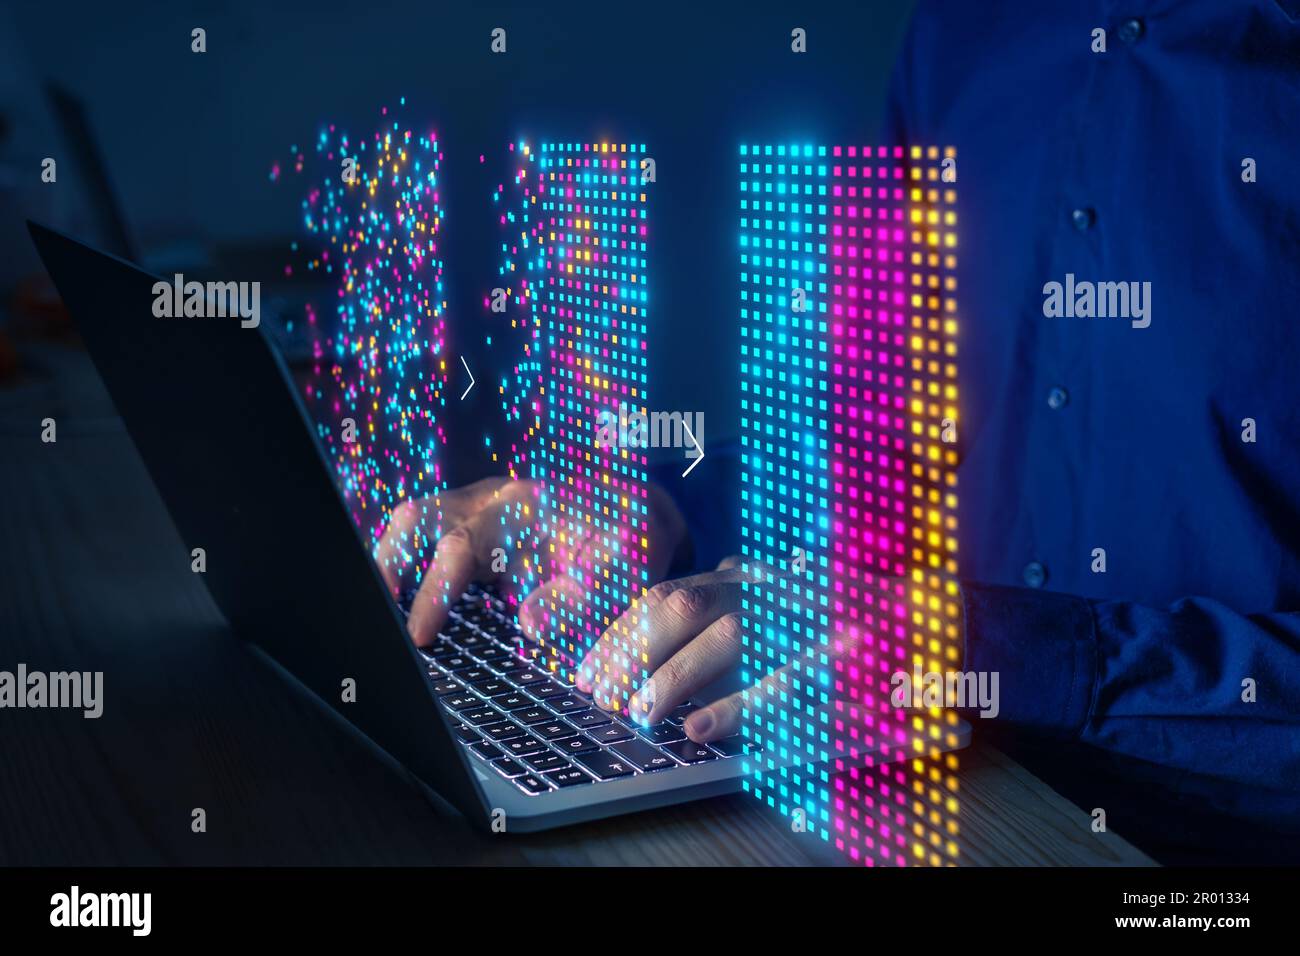 Big data analysed with AI technology for business analytics. Getting insights from data mining, filtering, sorting, clustering. Data scientist working Stock Photo